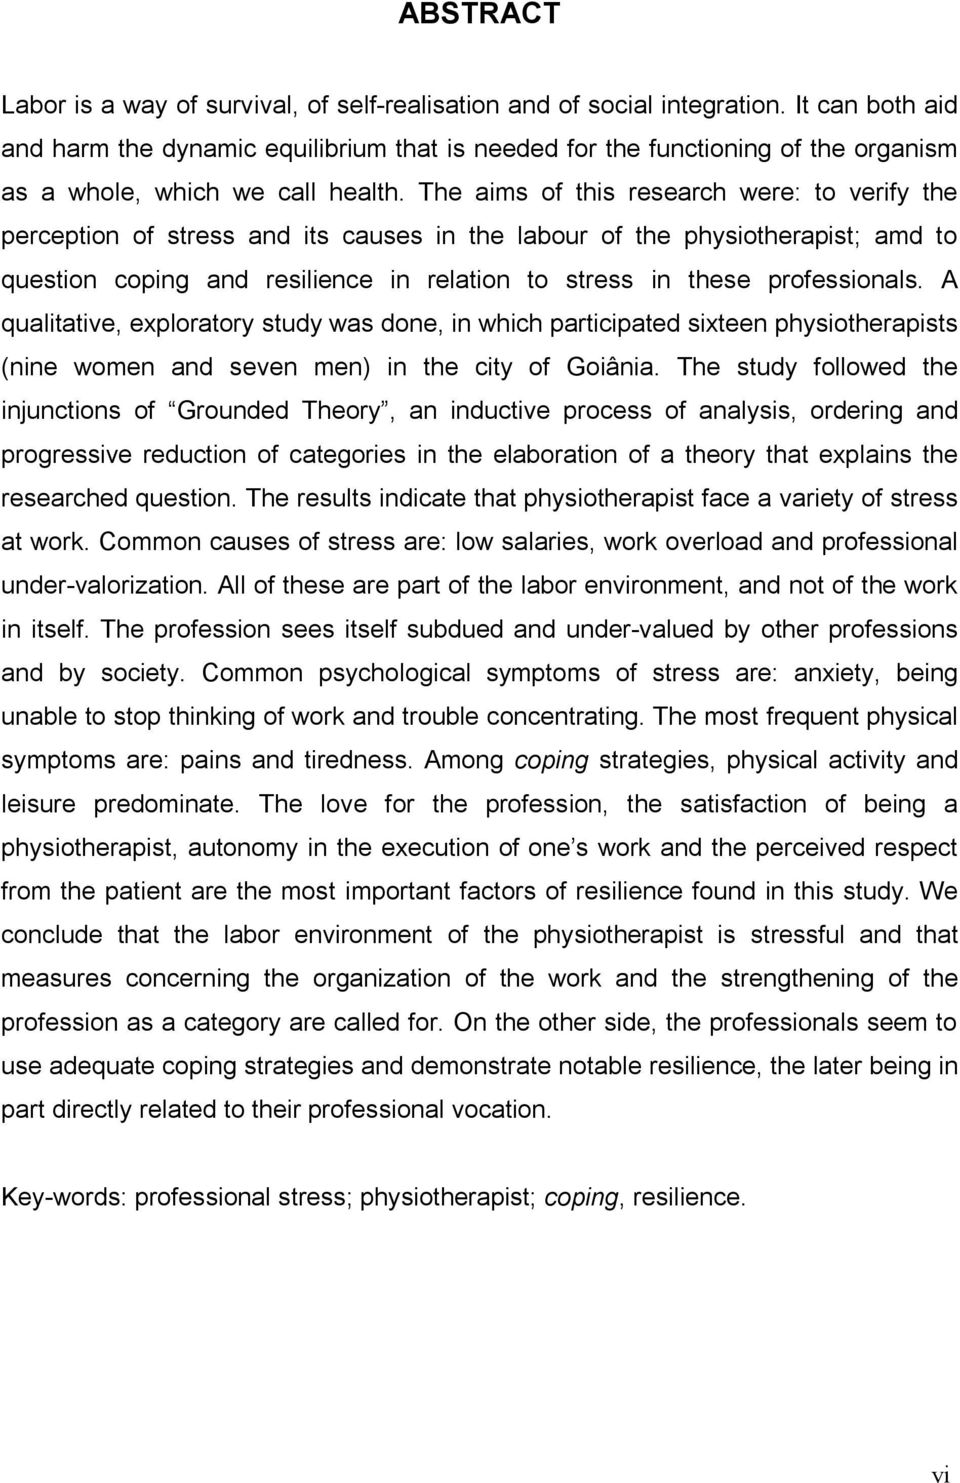 The aims of this research were: to verify the perception of stress and its causes in the labour of the physiotherapist; amd to question coping and resilience in relation to stress in these